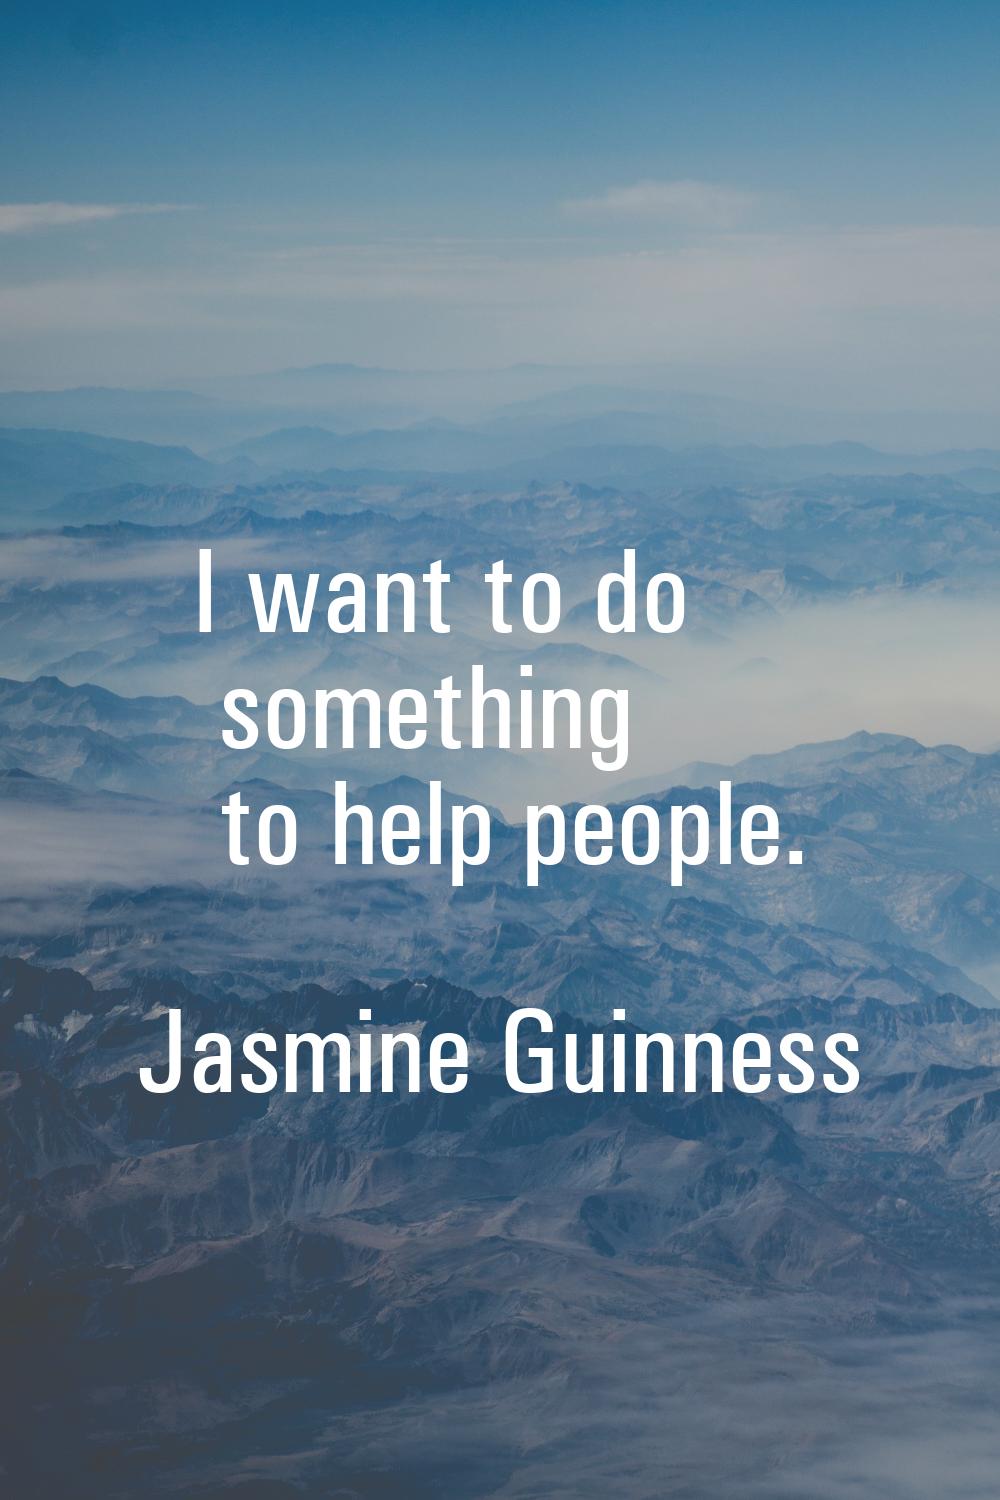 I want to do something to help people.